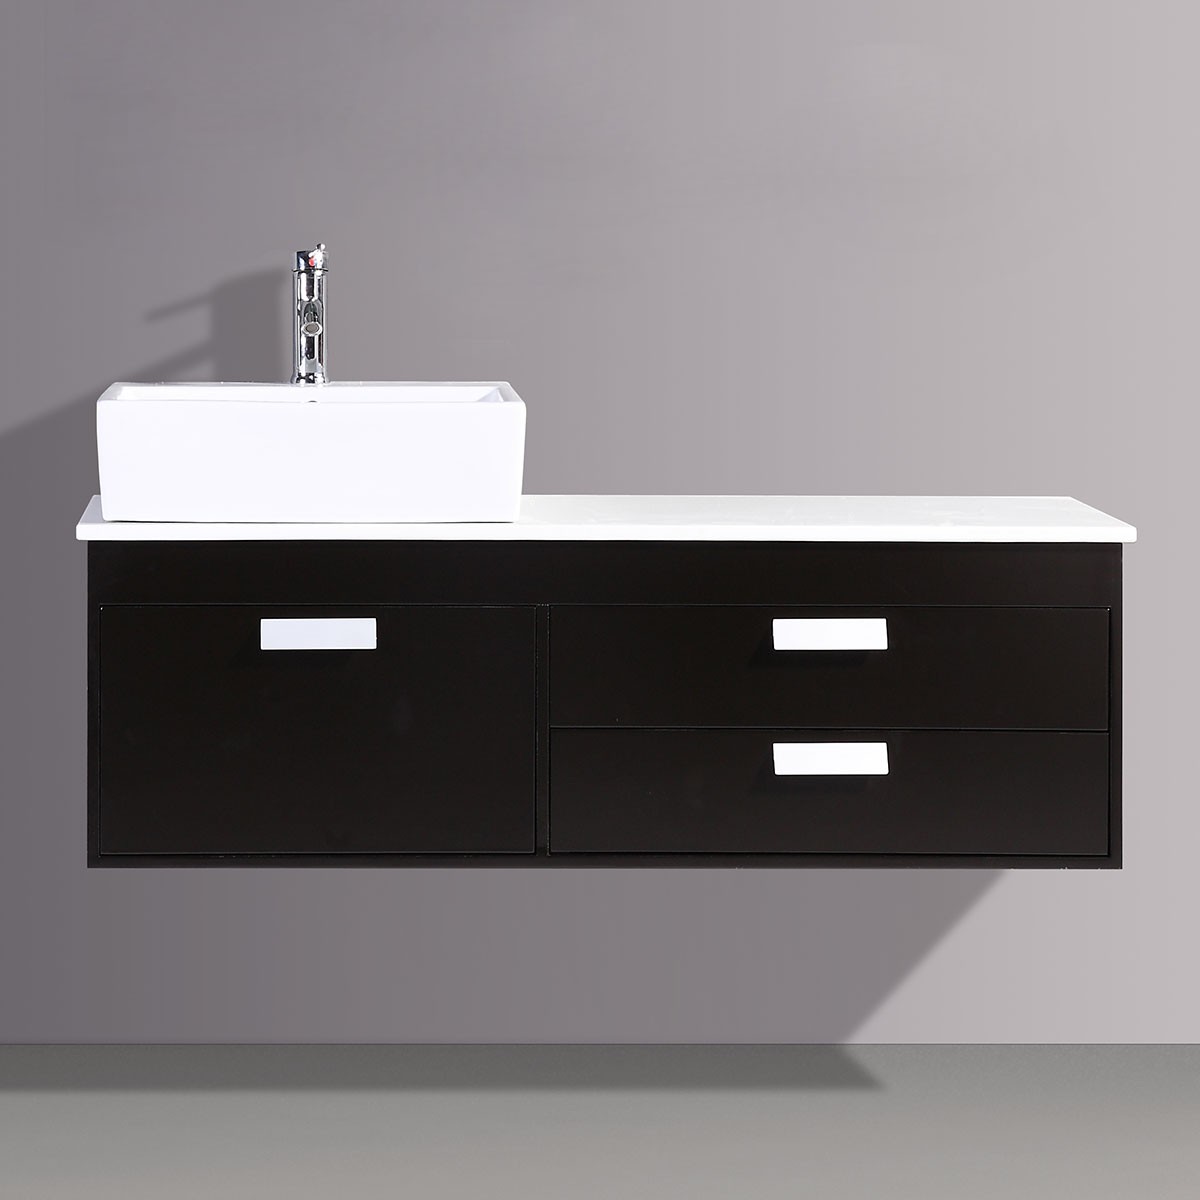 51 In. Espresso Wall-Mount Vanity with Polymarble Top and Ceramic Basin (DK-T9099B-V)